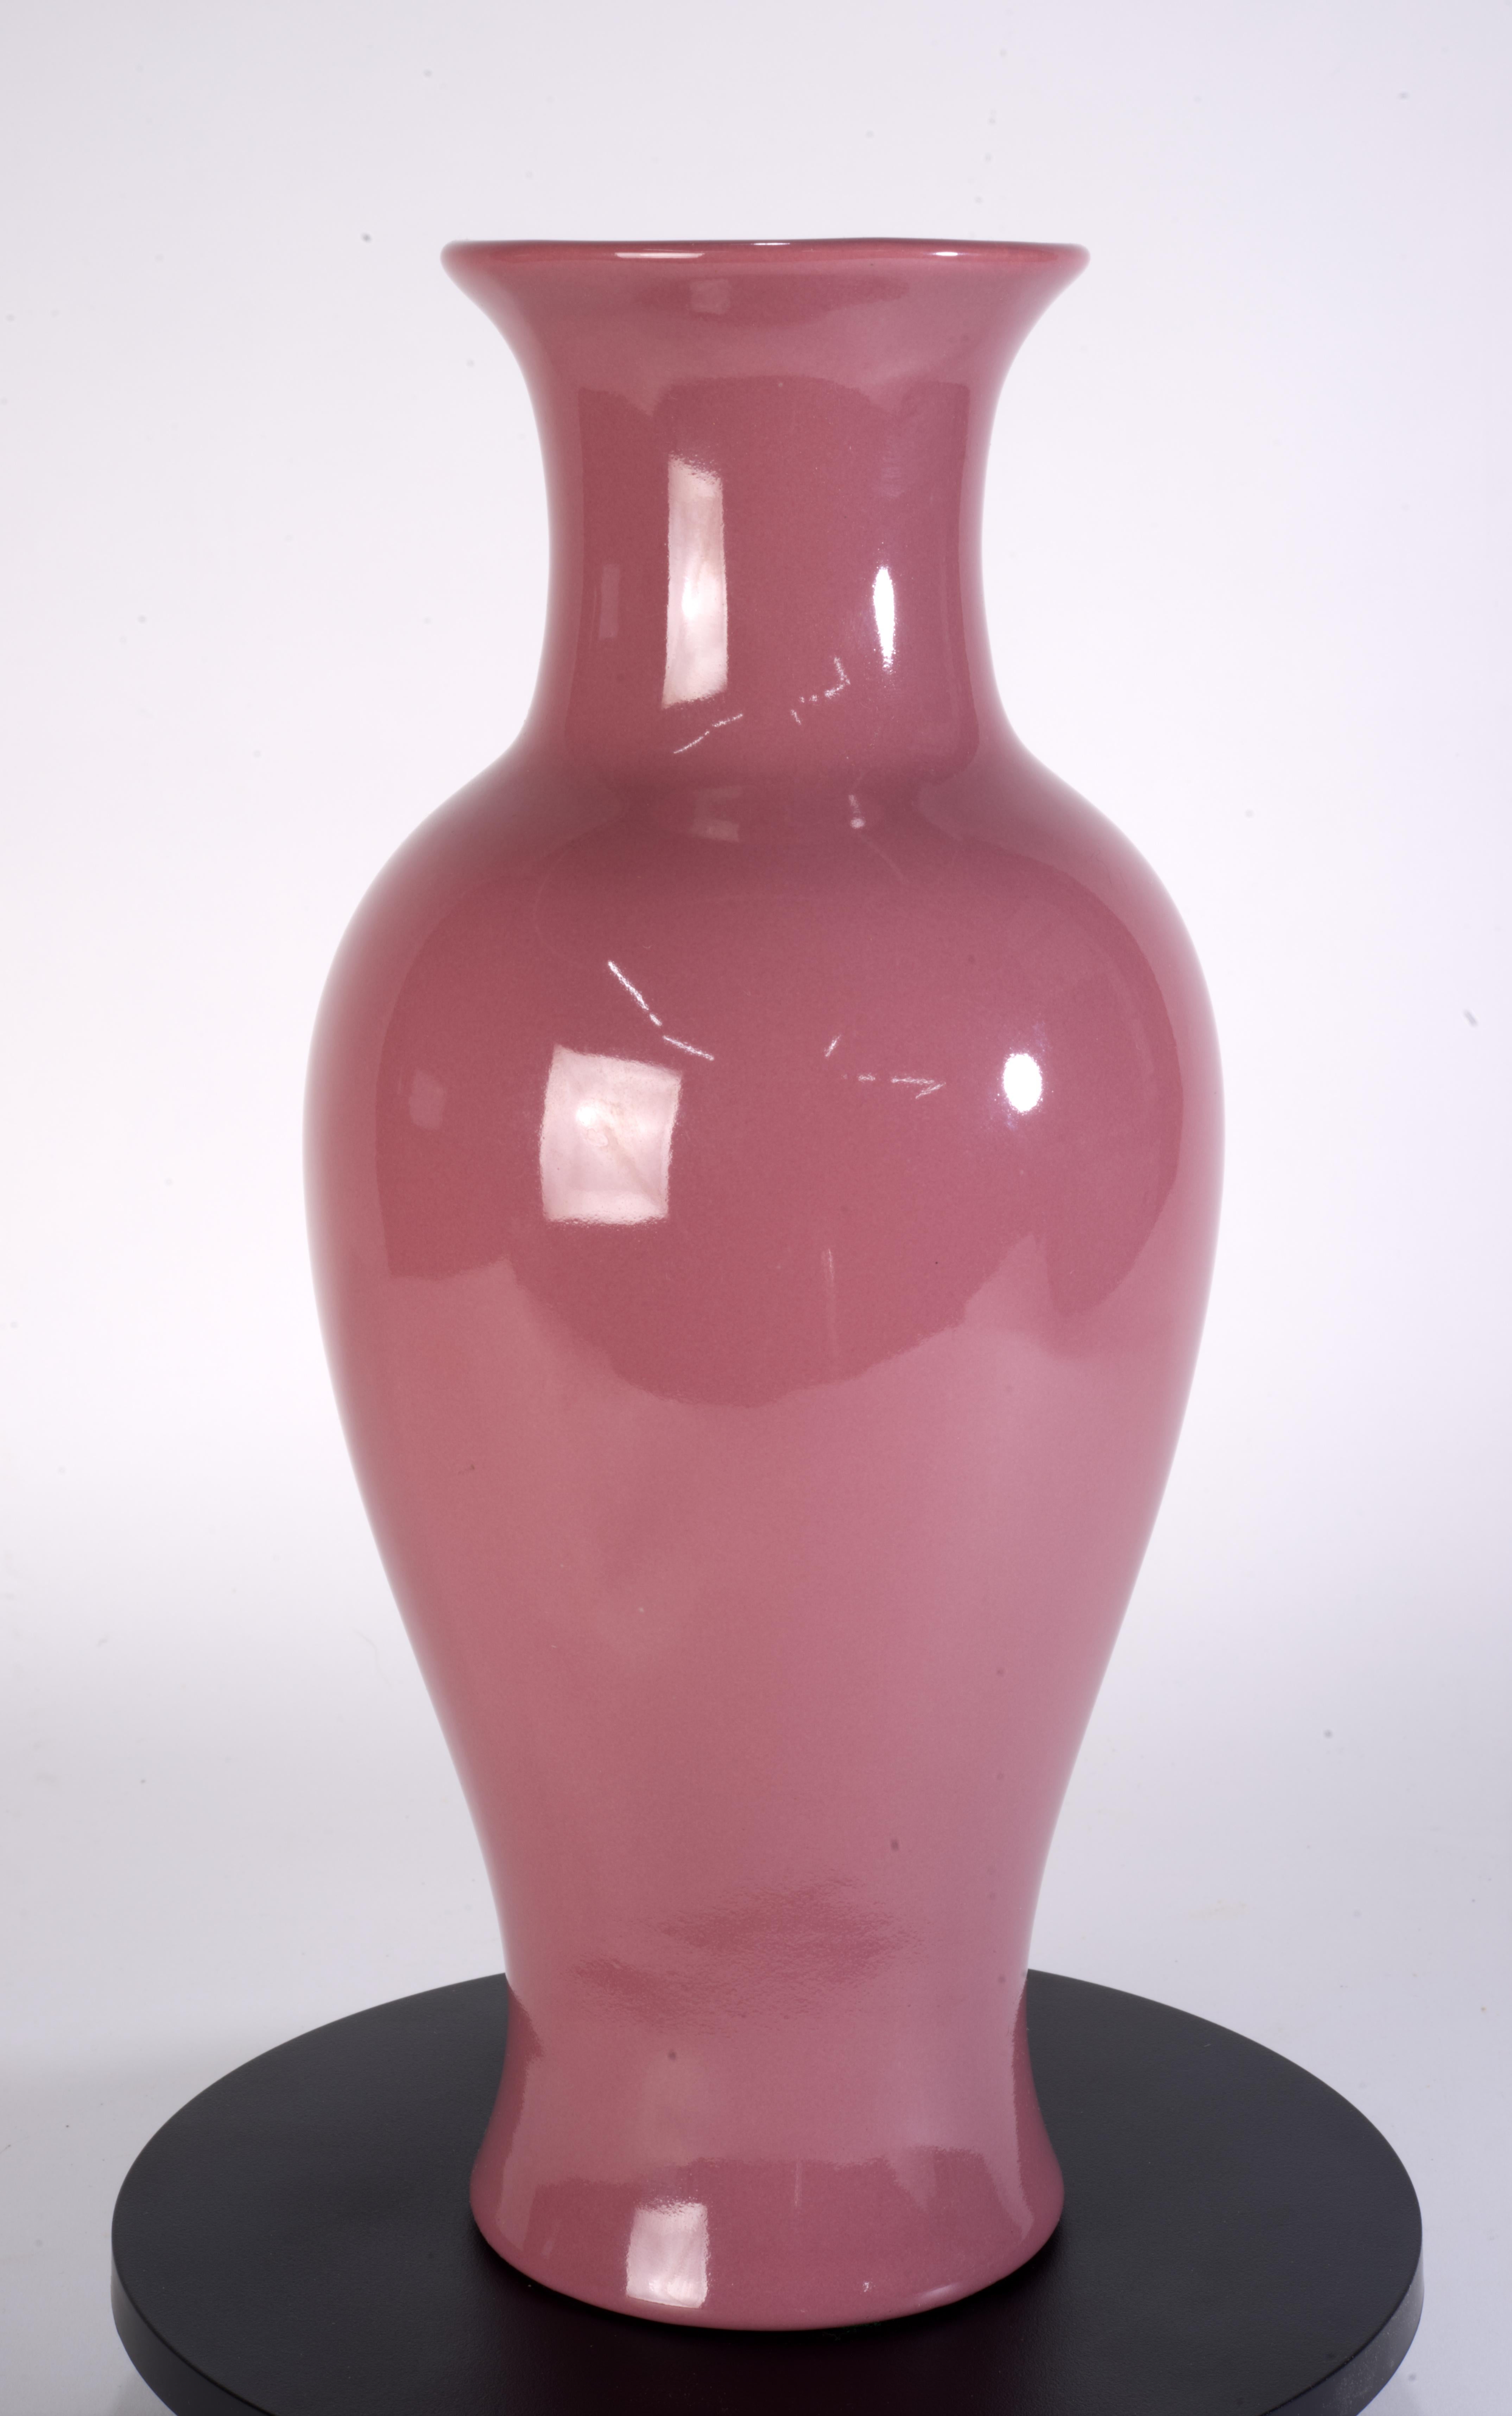  Royal Haeger mauve pink vase has graceful elongated shape and monochromatic semi-glossy glaze. This medium size, minimalist vase will look great on its own or paired with other pieces to form a group, and will blend seamlessly in various interior